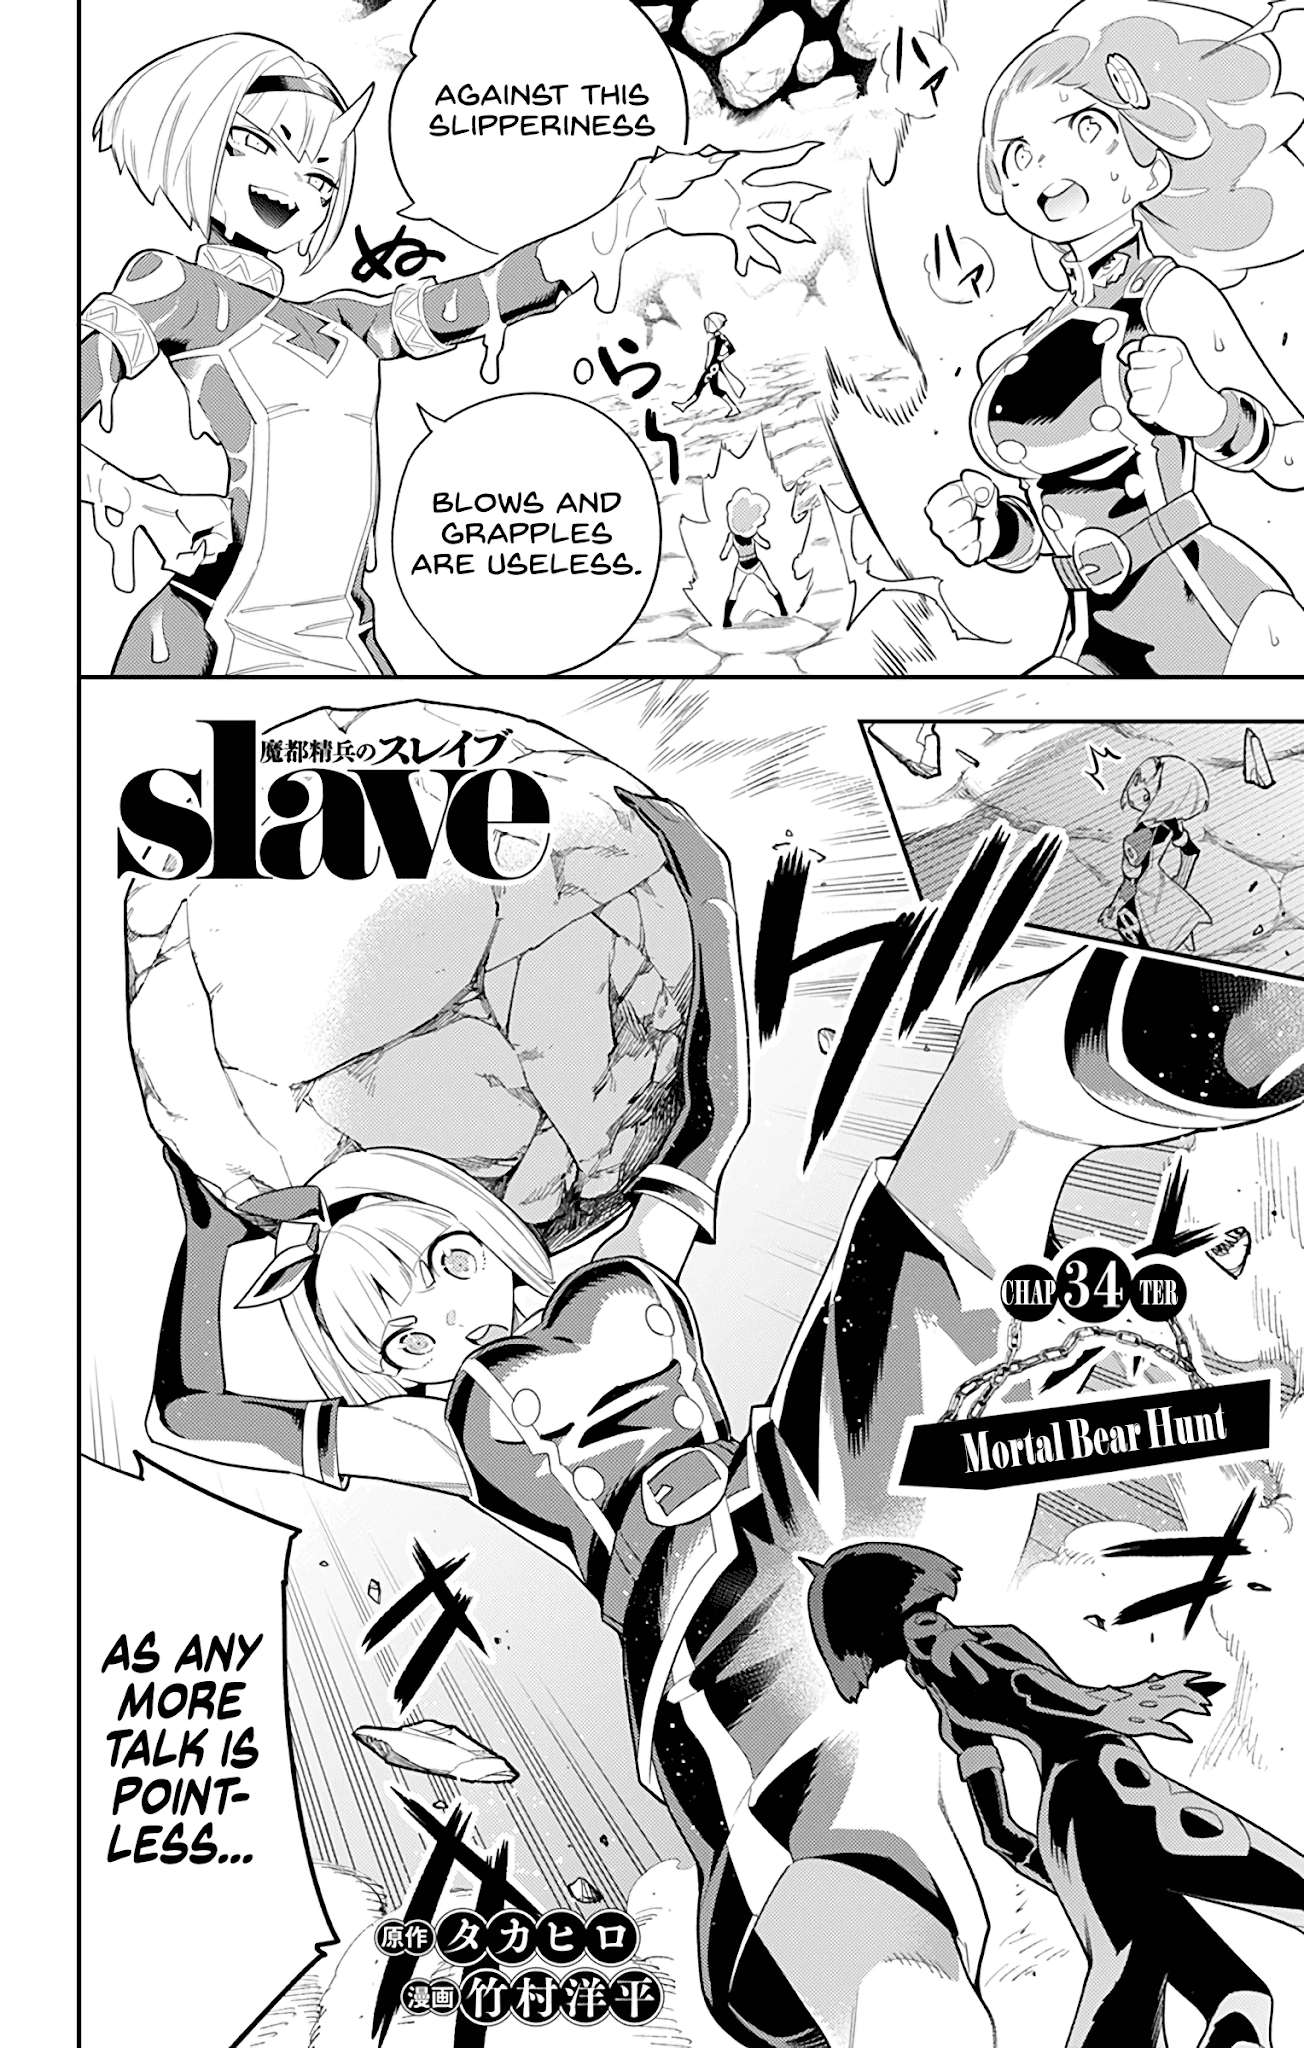 Slave Of The Magic Capital's Elite Troops - Page 1